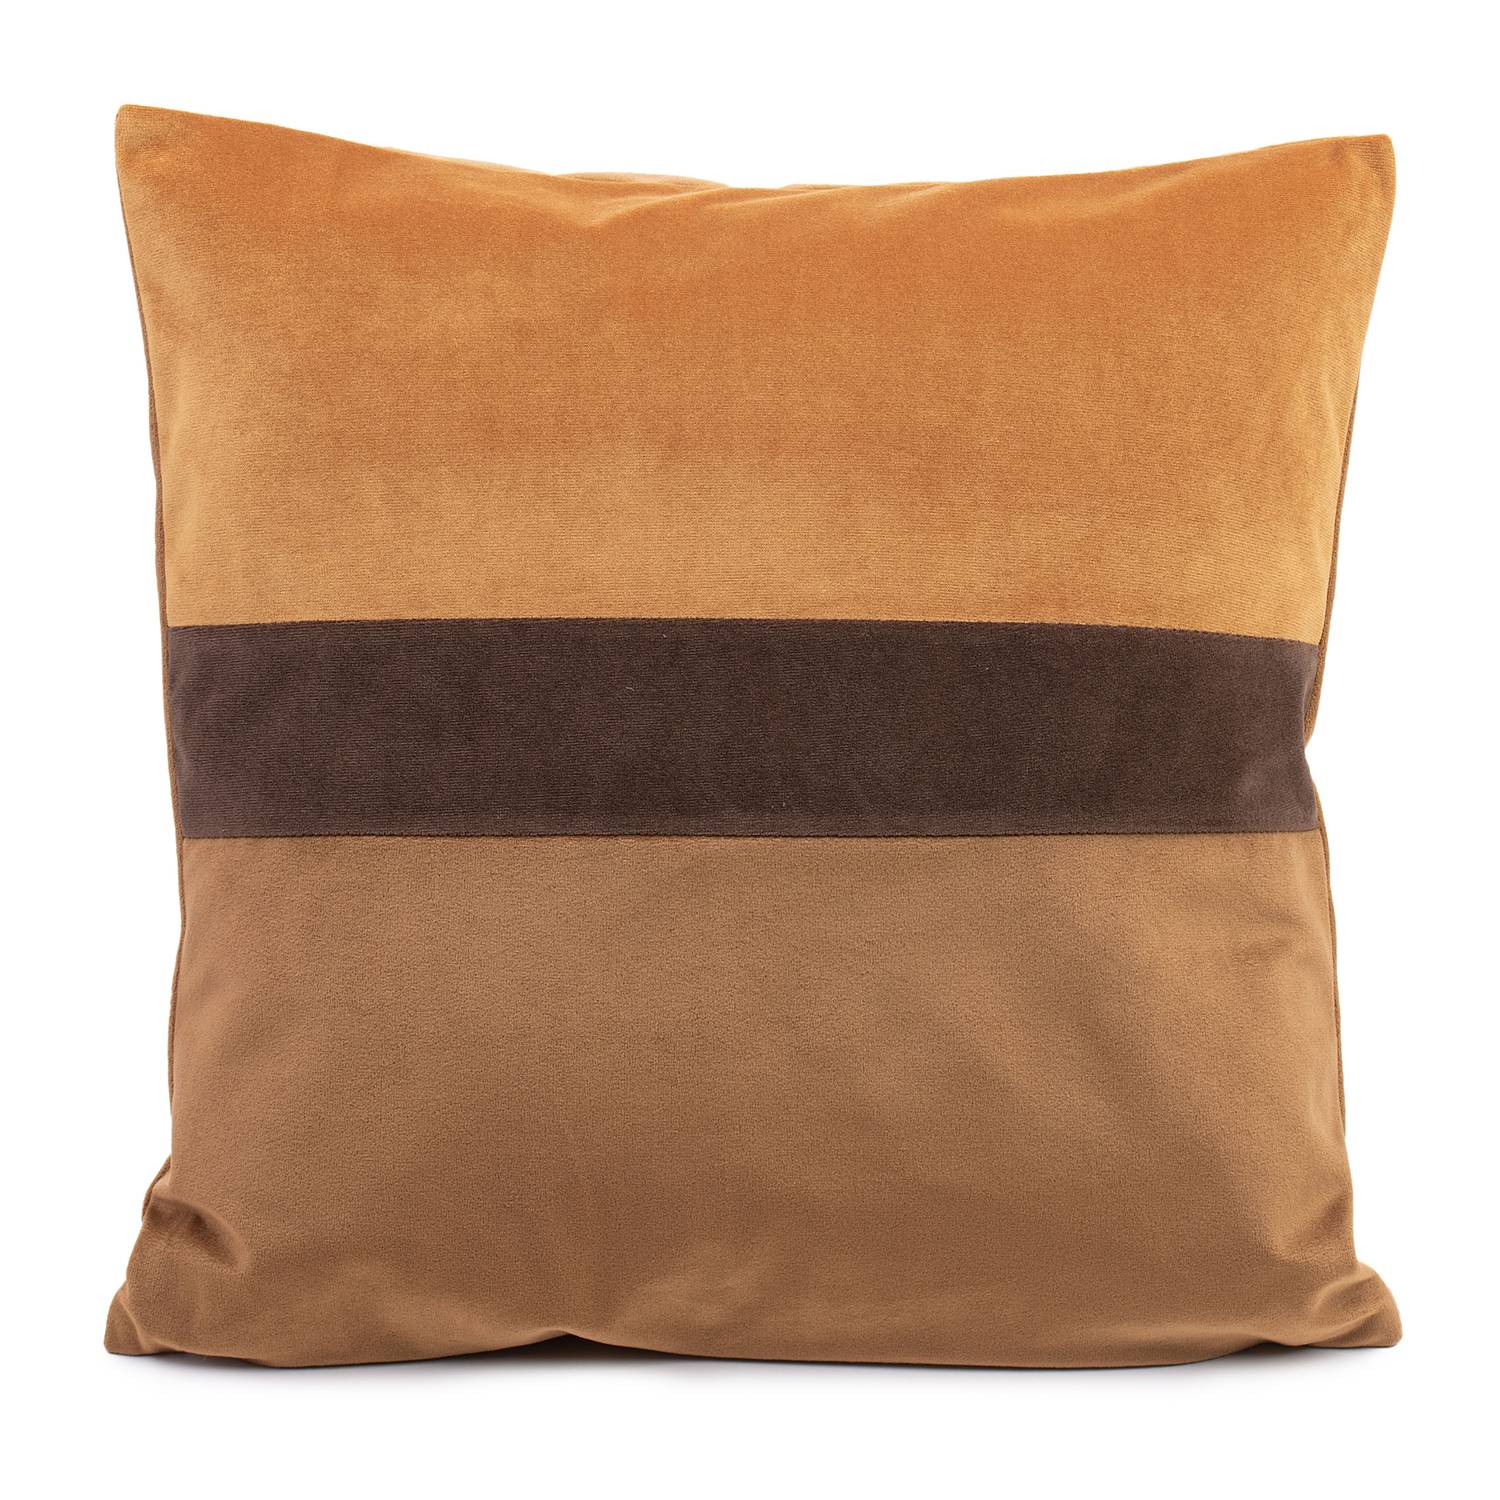 Image of Housse de coussin Pino 000000001000243547